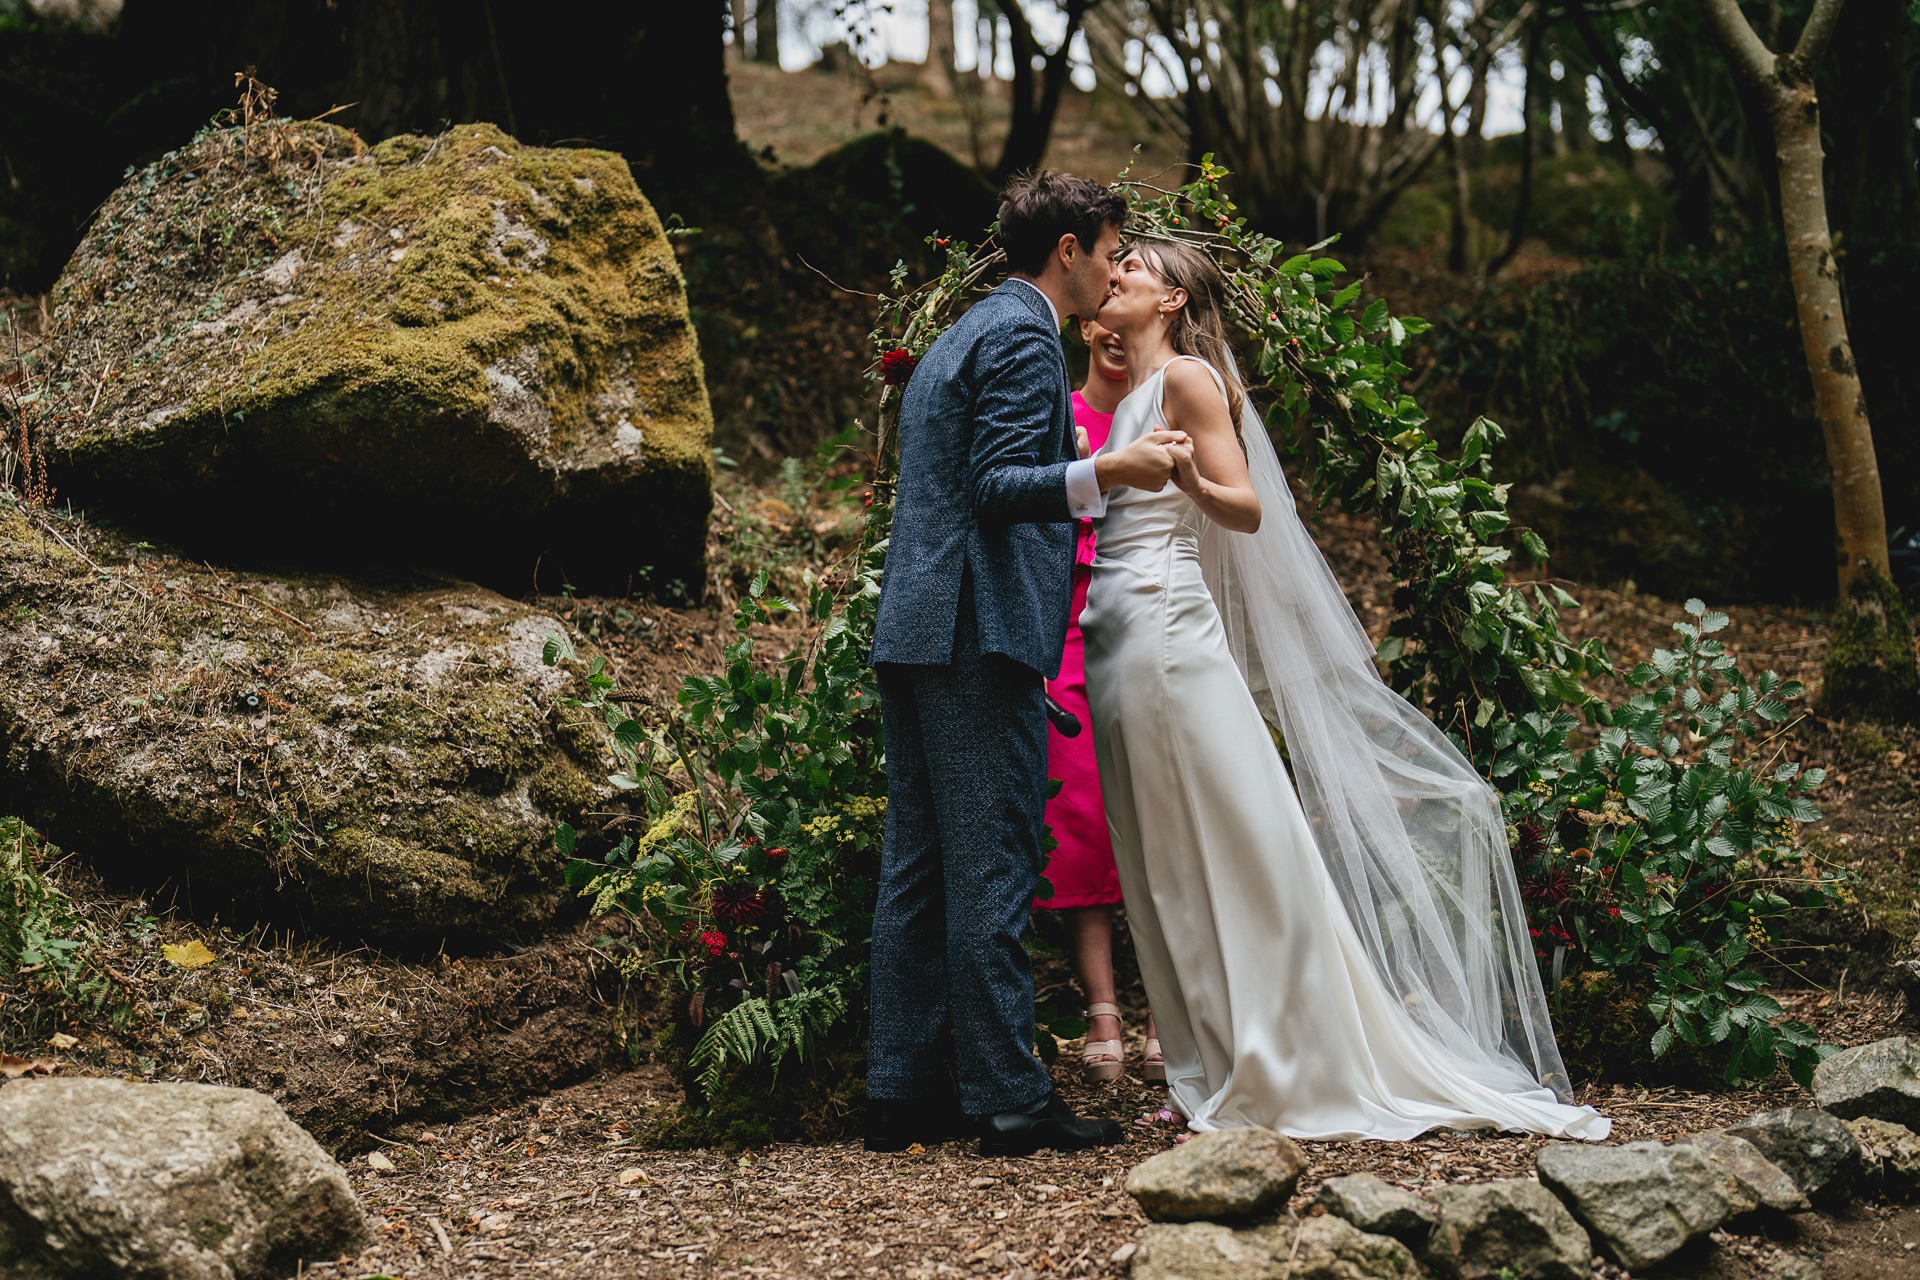 A bride and groom just married in an outdoor woodland ceremony, kissing each other by a hazel arch